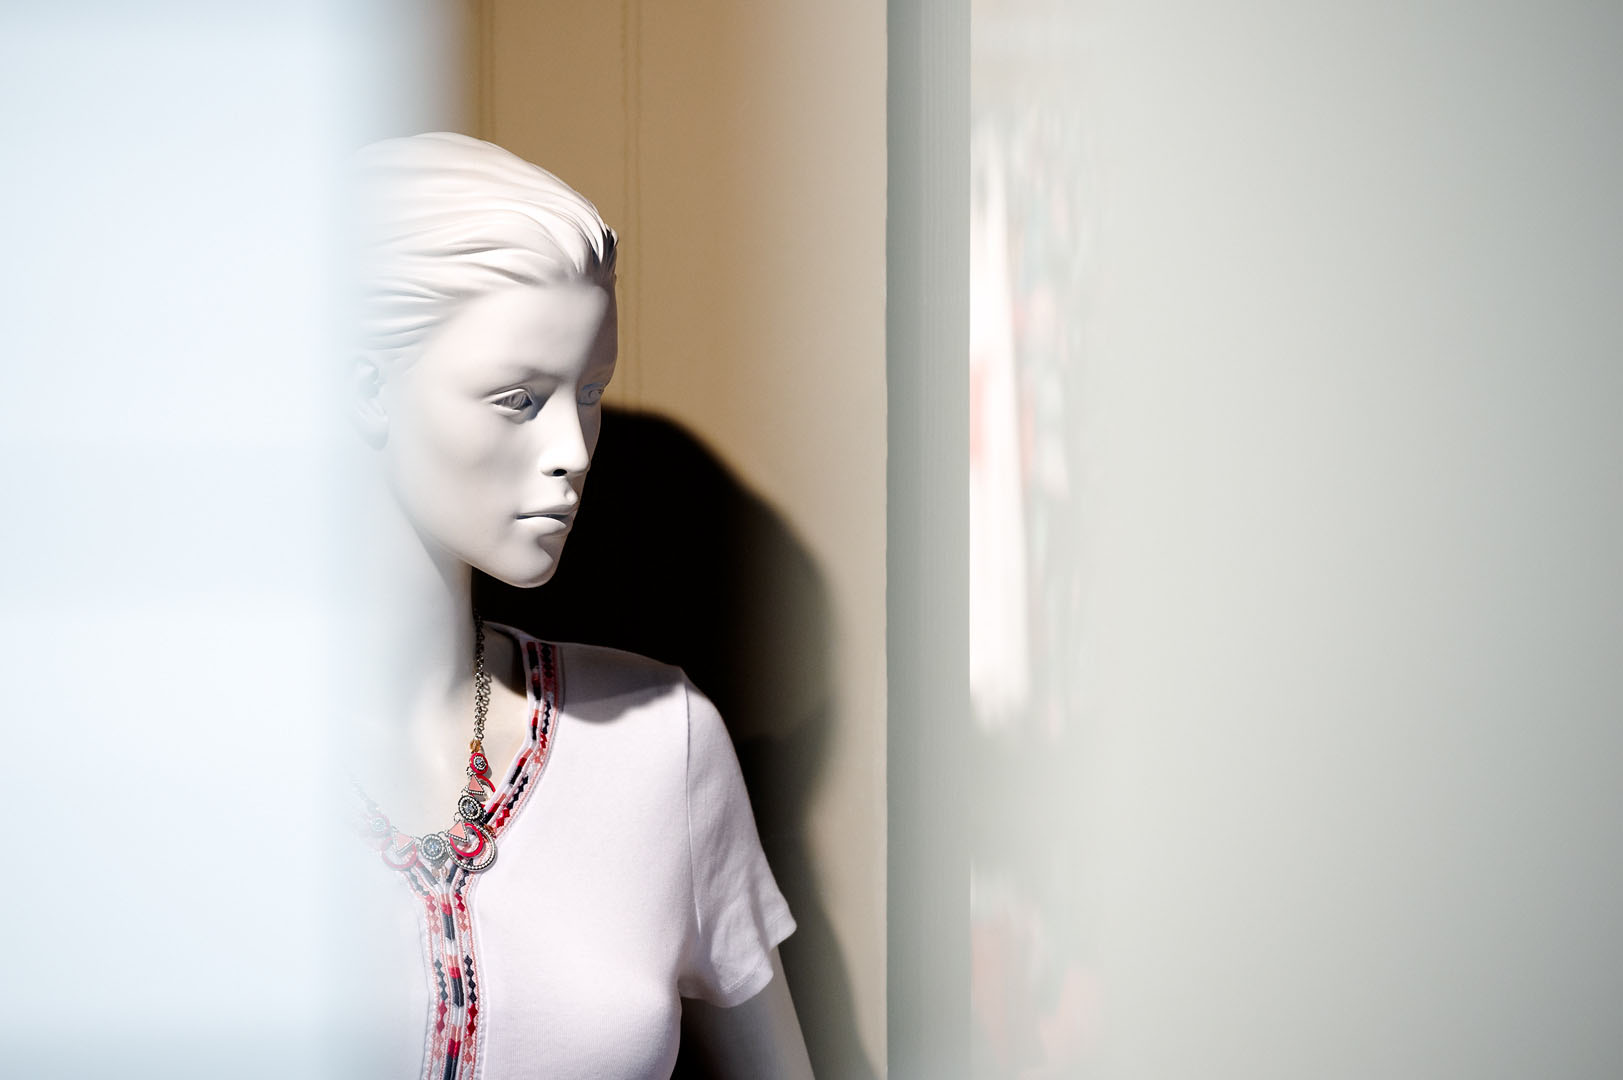 Mannequin looking through the space between